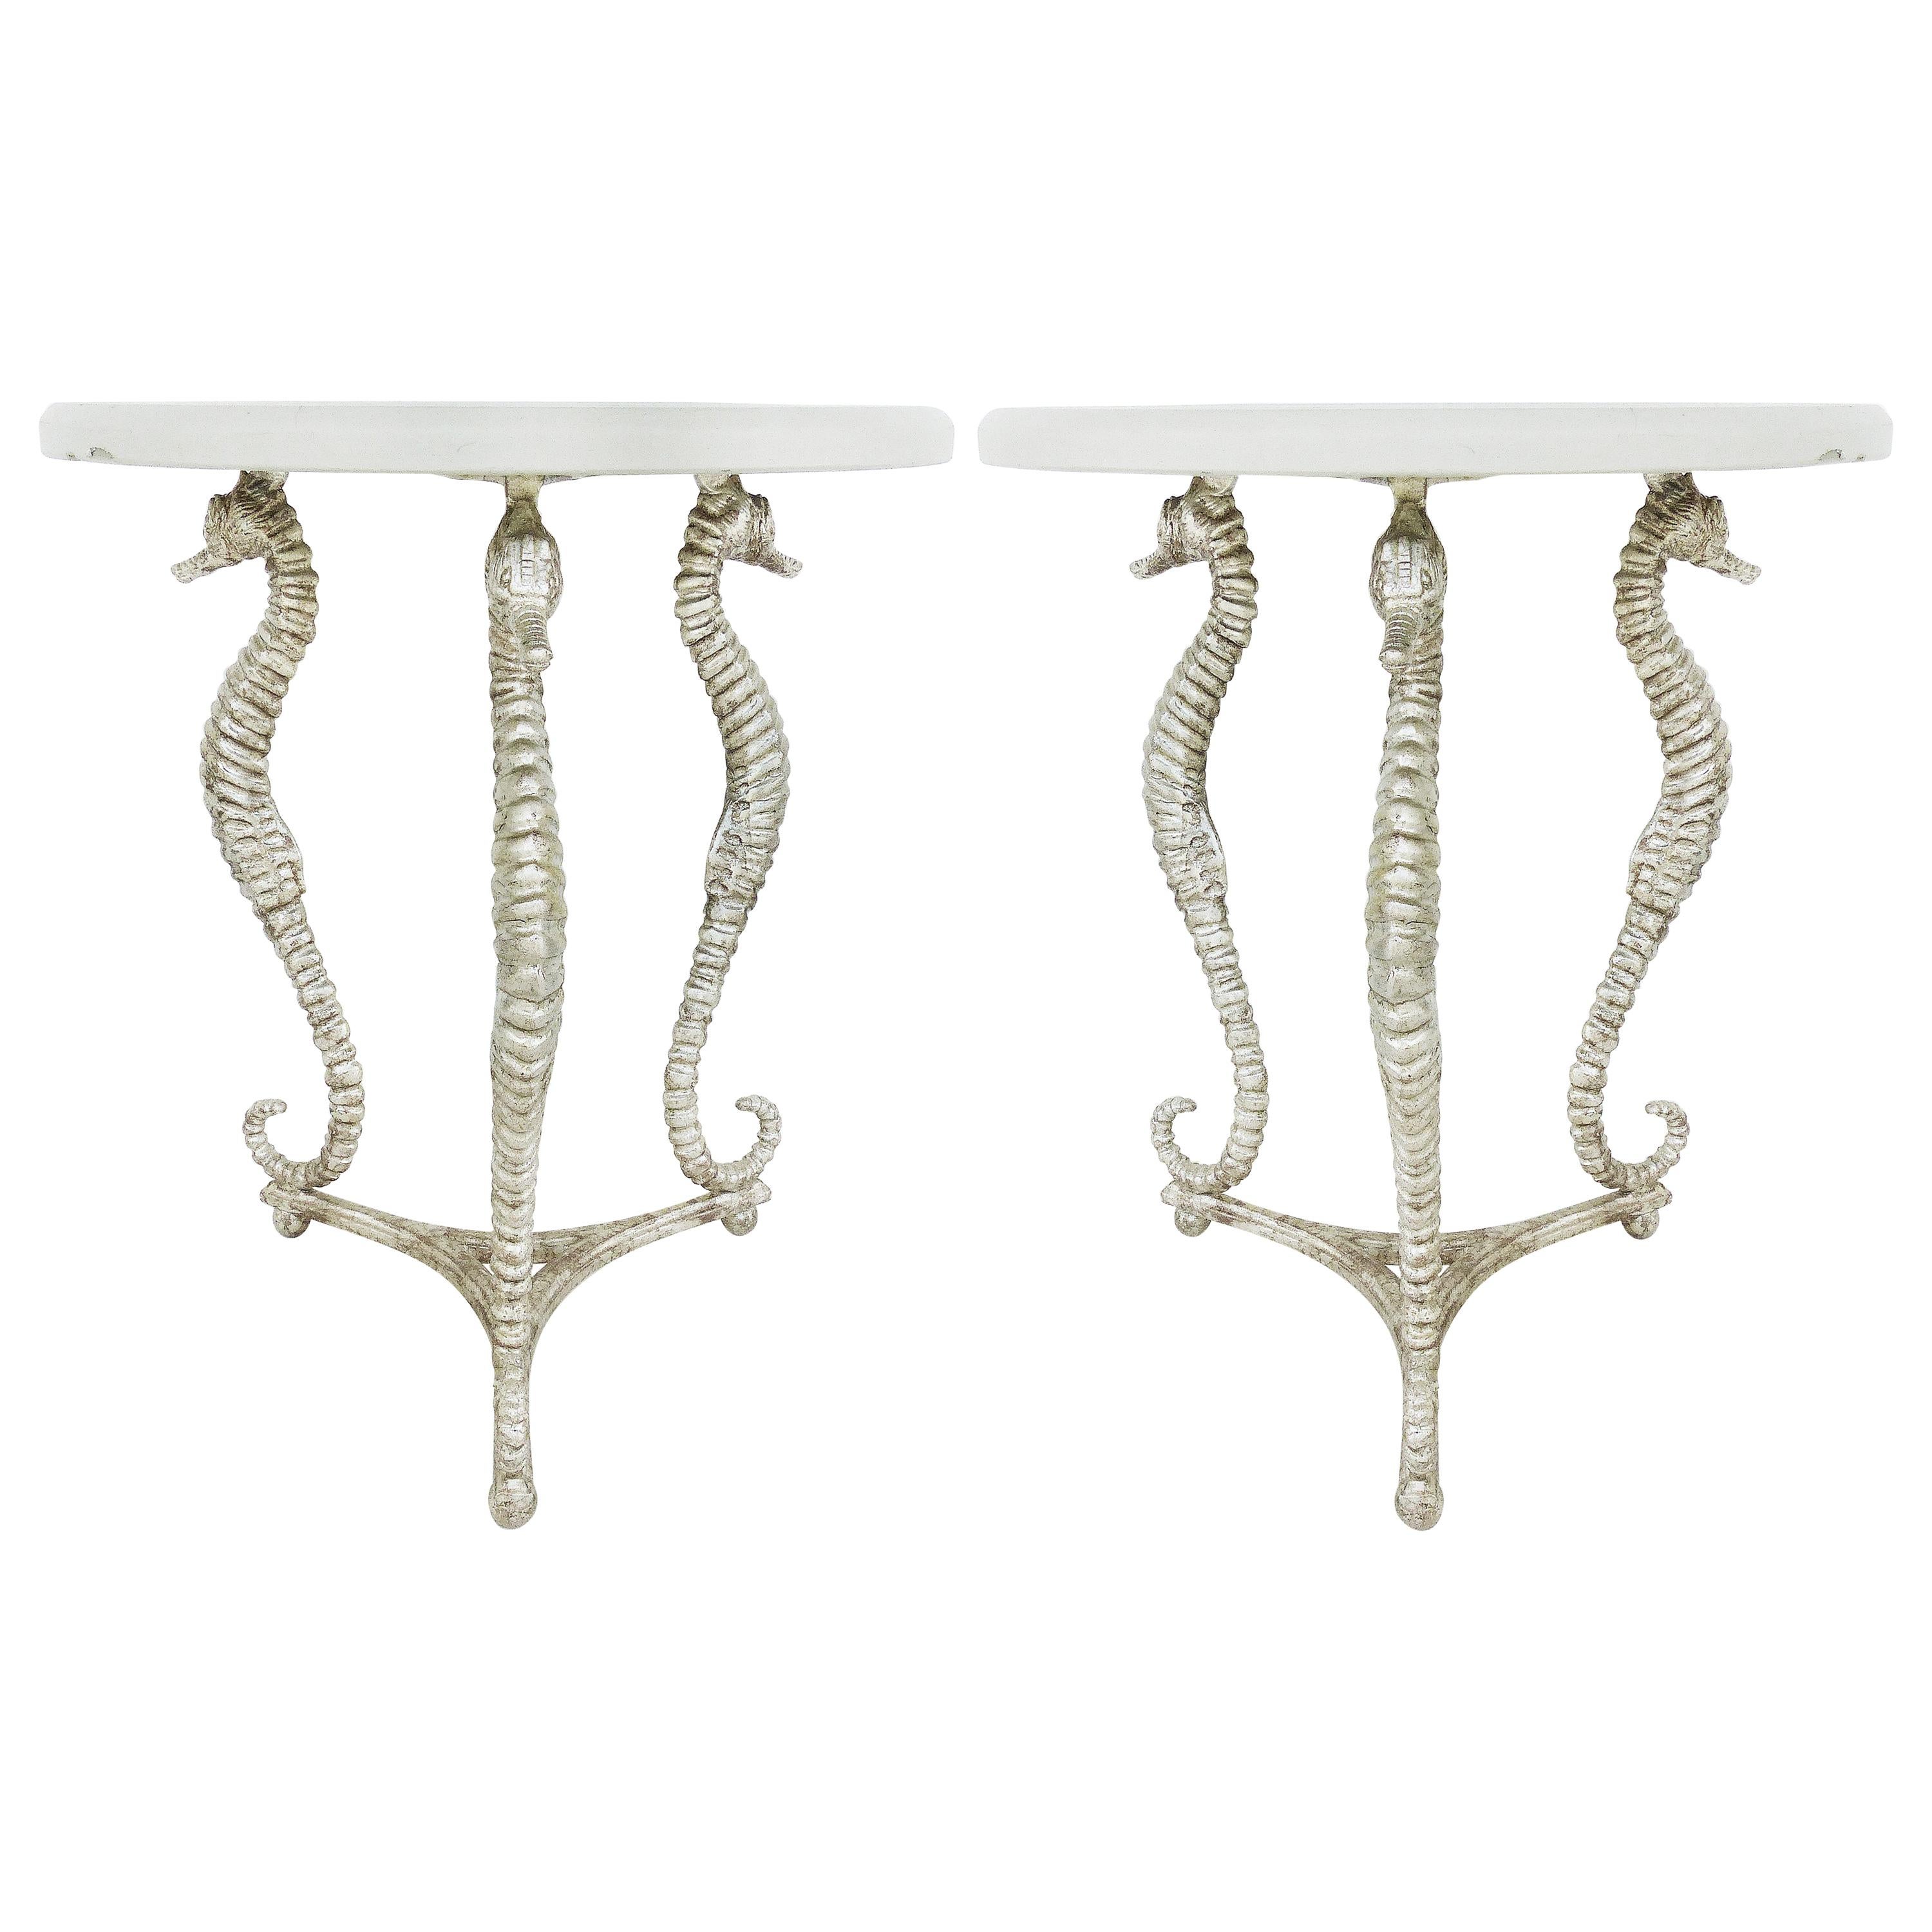 Vintage Ironies Seahorse Silver-Gilt Side Tables with Cast Stone Tops